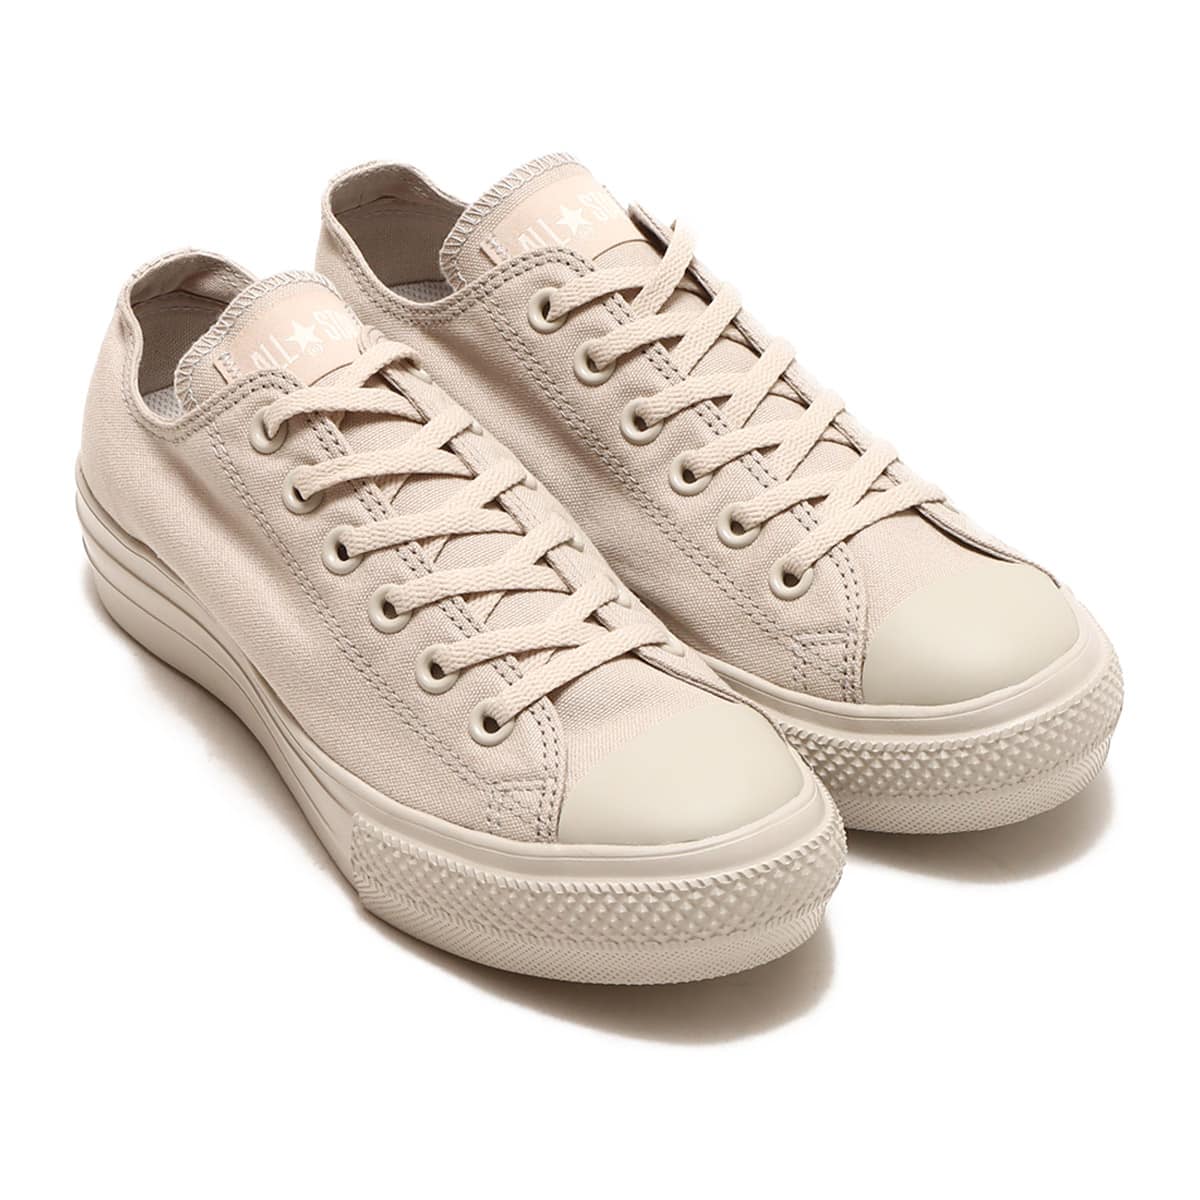 Exagerar licencia aplausos CONVERSE ALL STAR LIGHT PLTS MN OX BEIGE 23SS-I